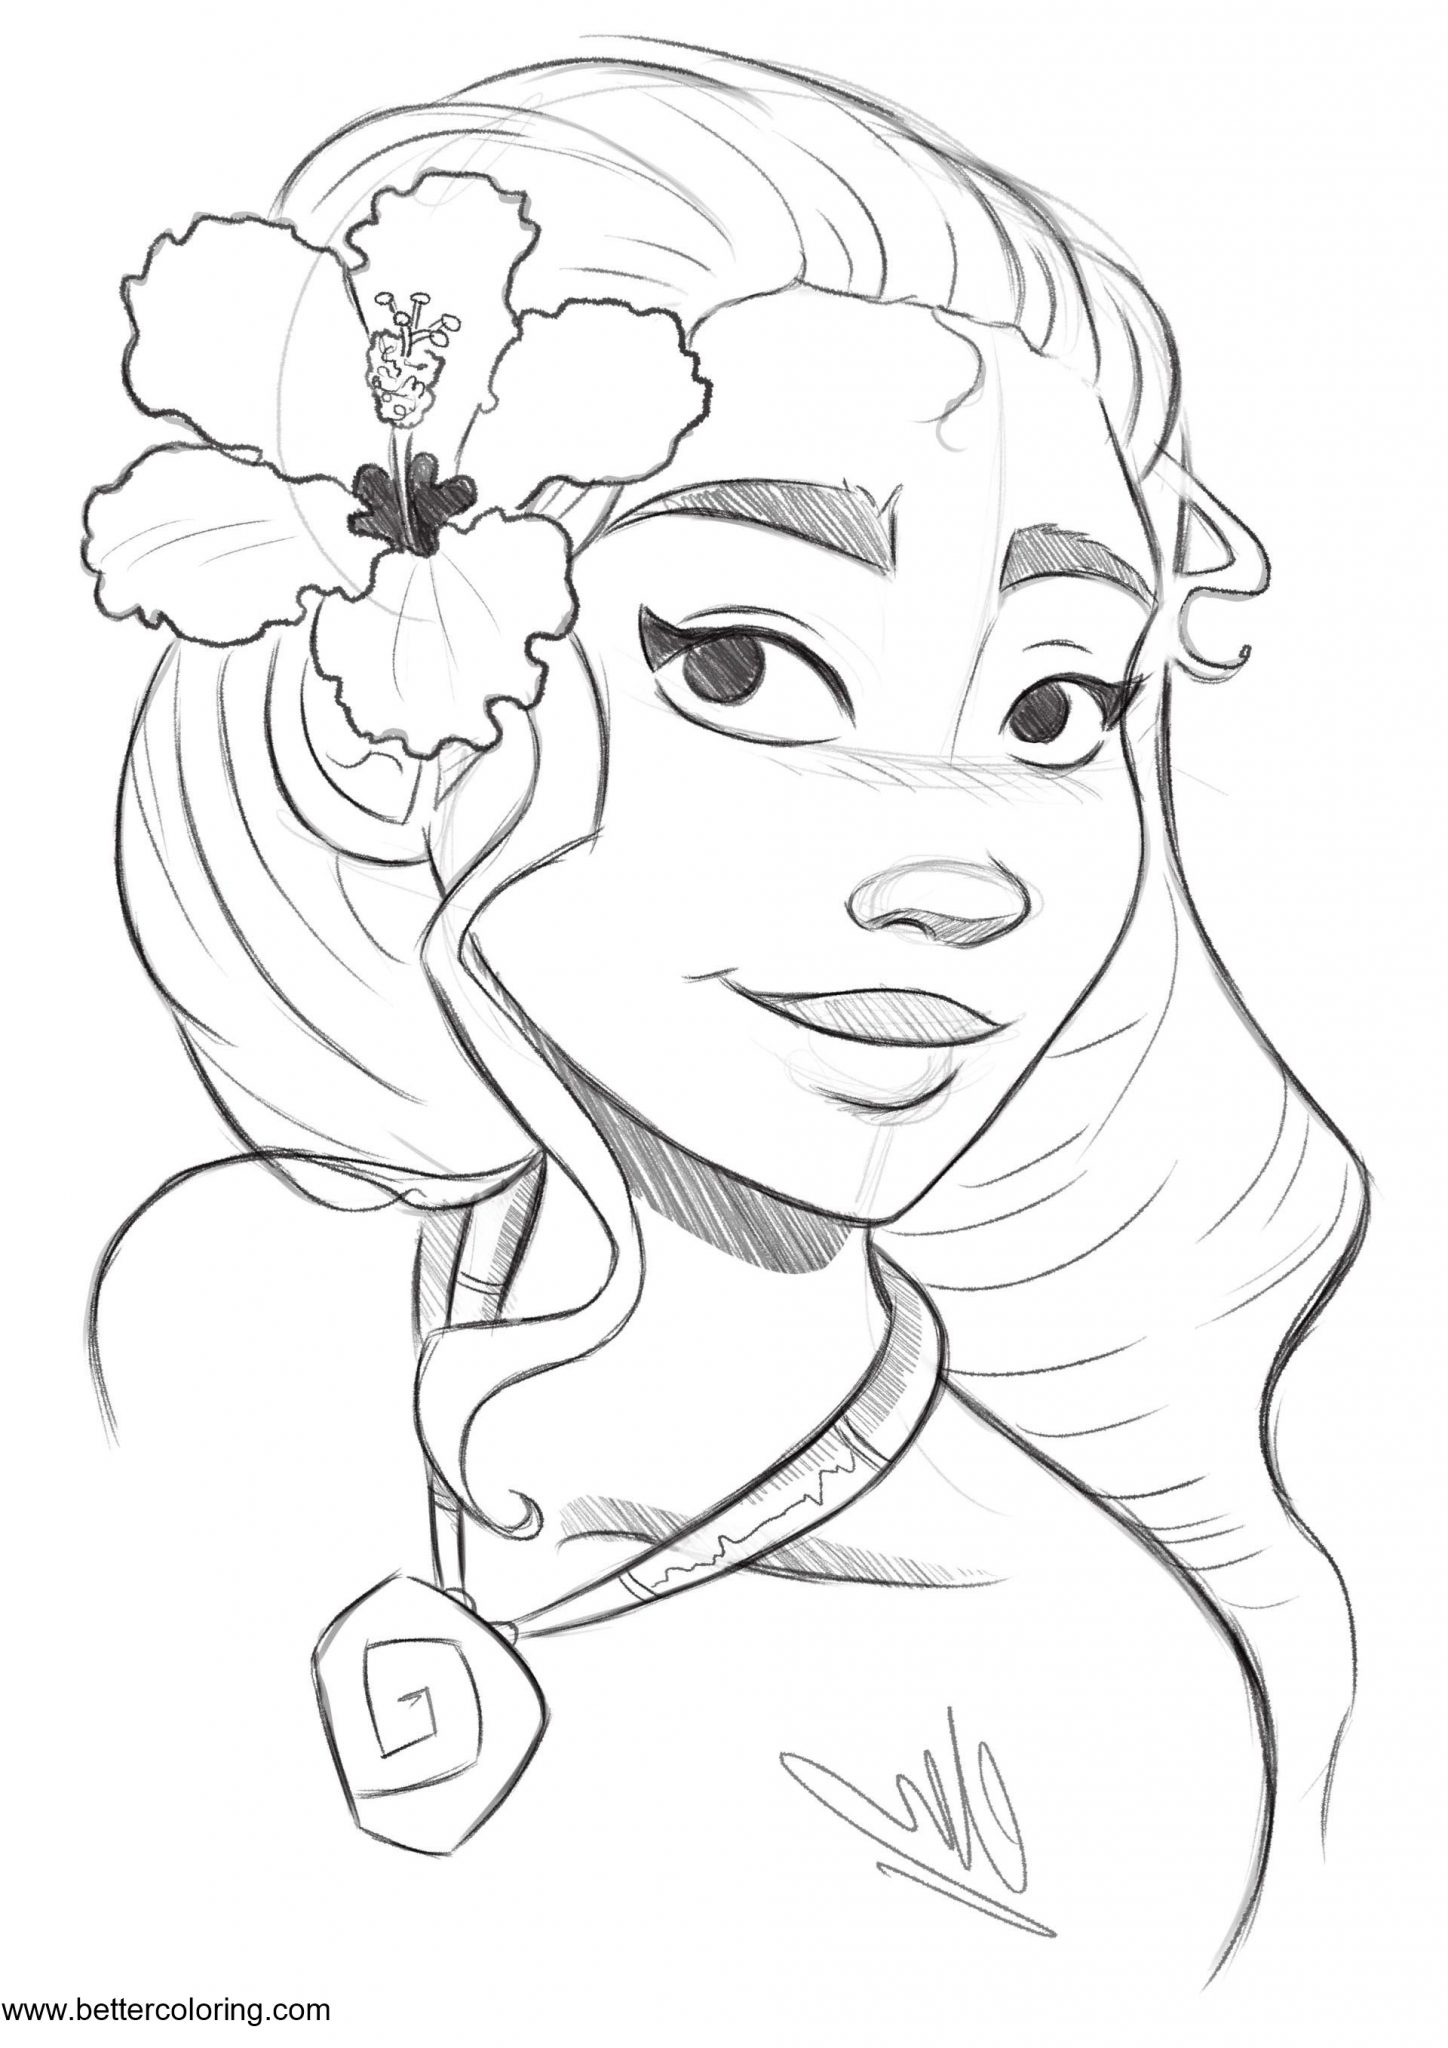 Download Moana Coloring Pages by Charlotte Lebreton - Free ...